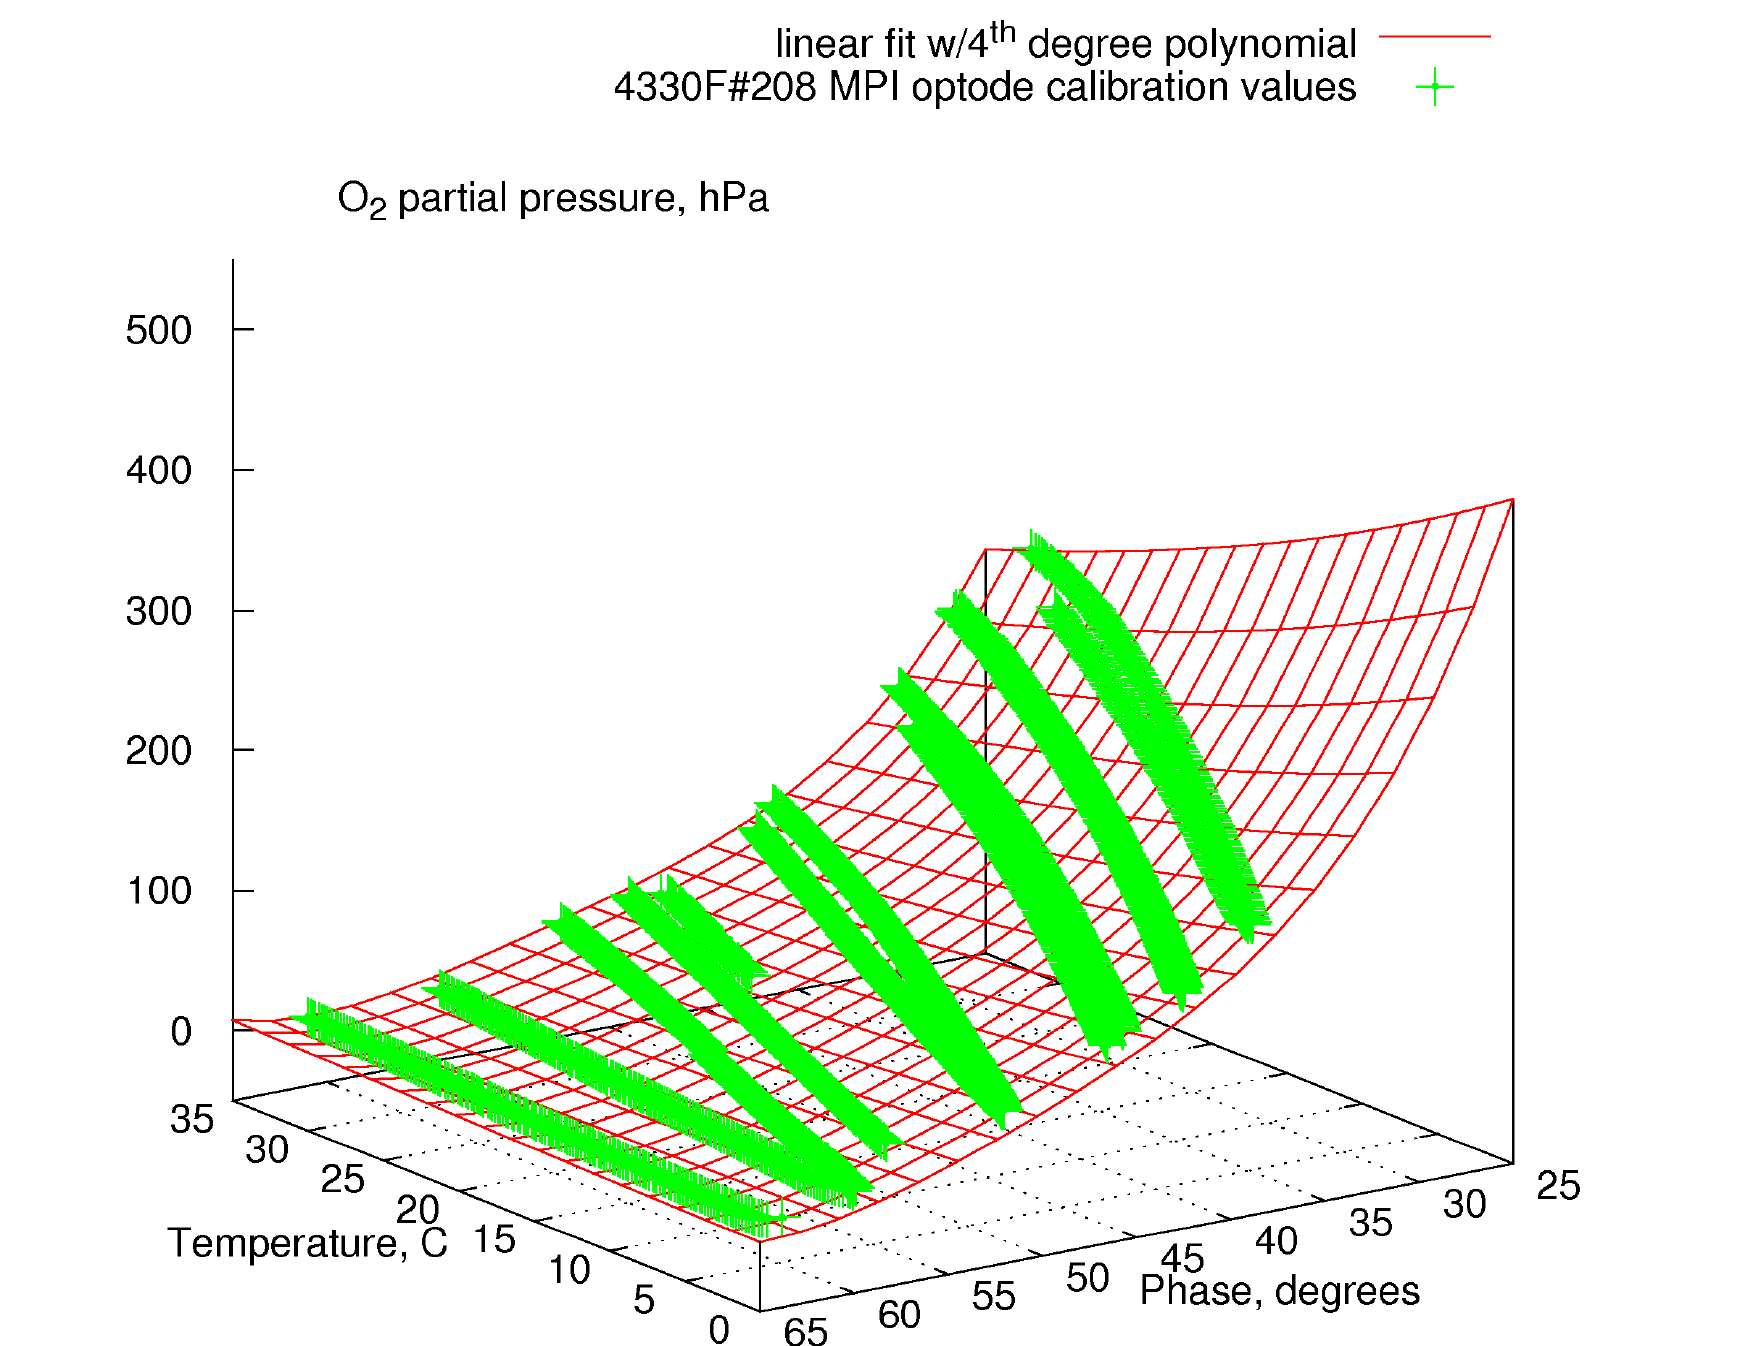 Figure 5: Example of a calibration function polynomial of 4th degree for a particular oxygen optode. The green lines are the actual measured values.